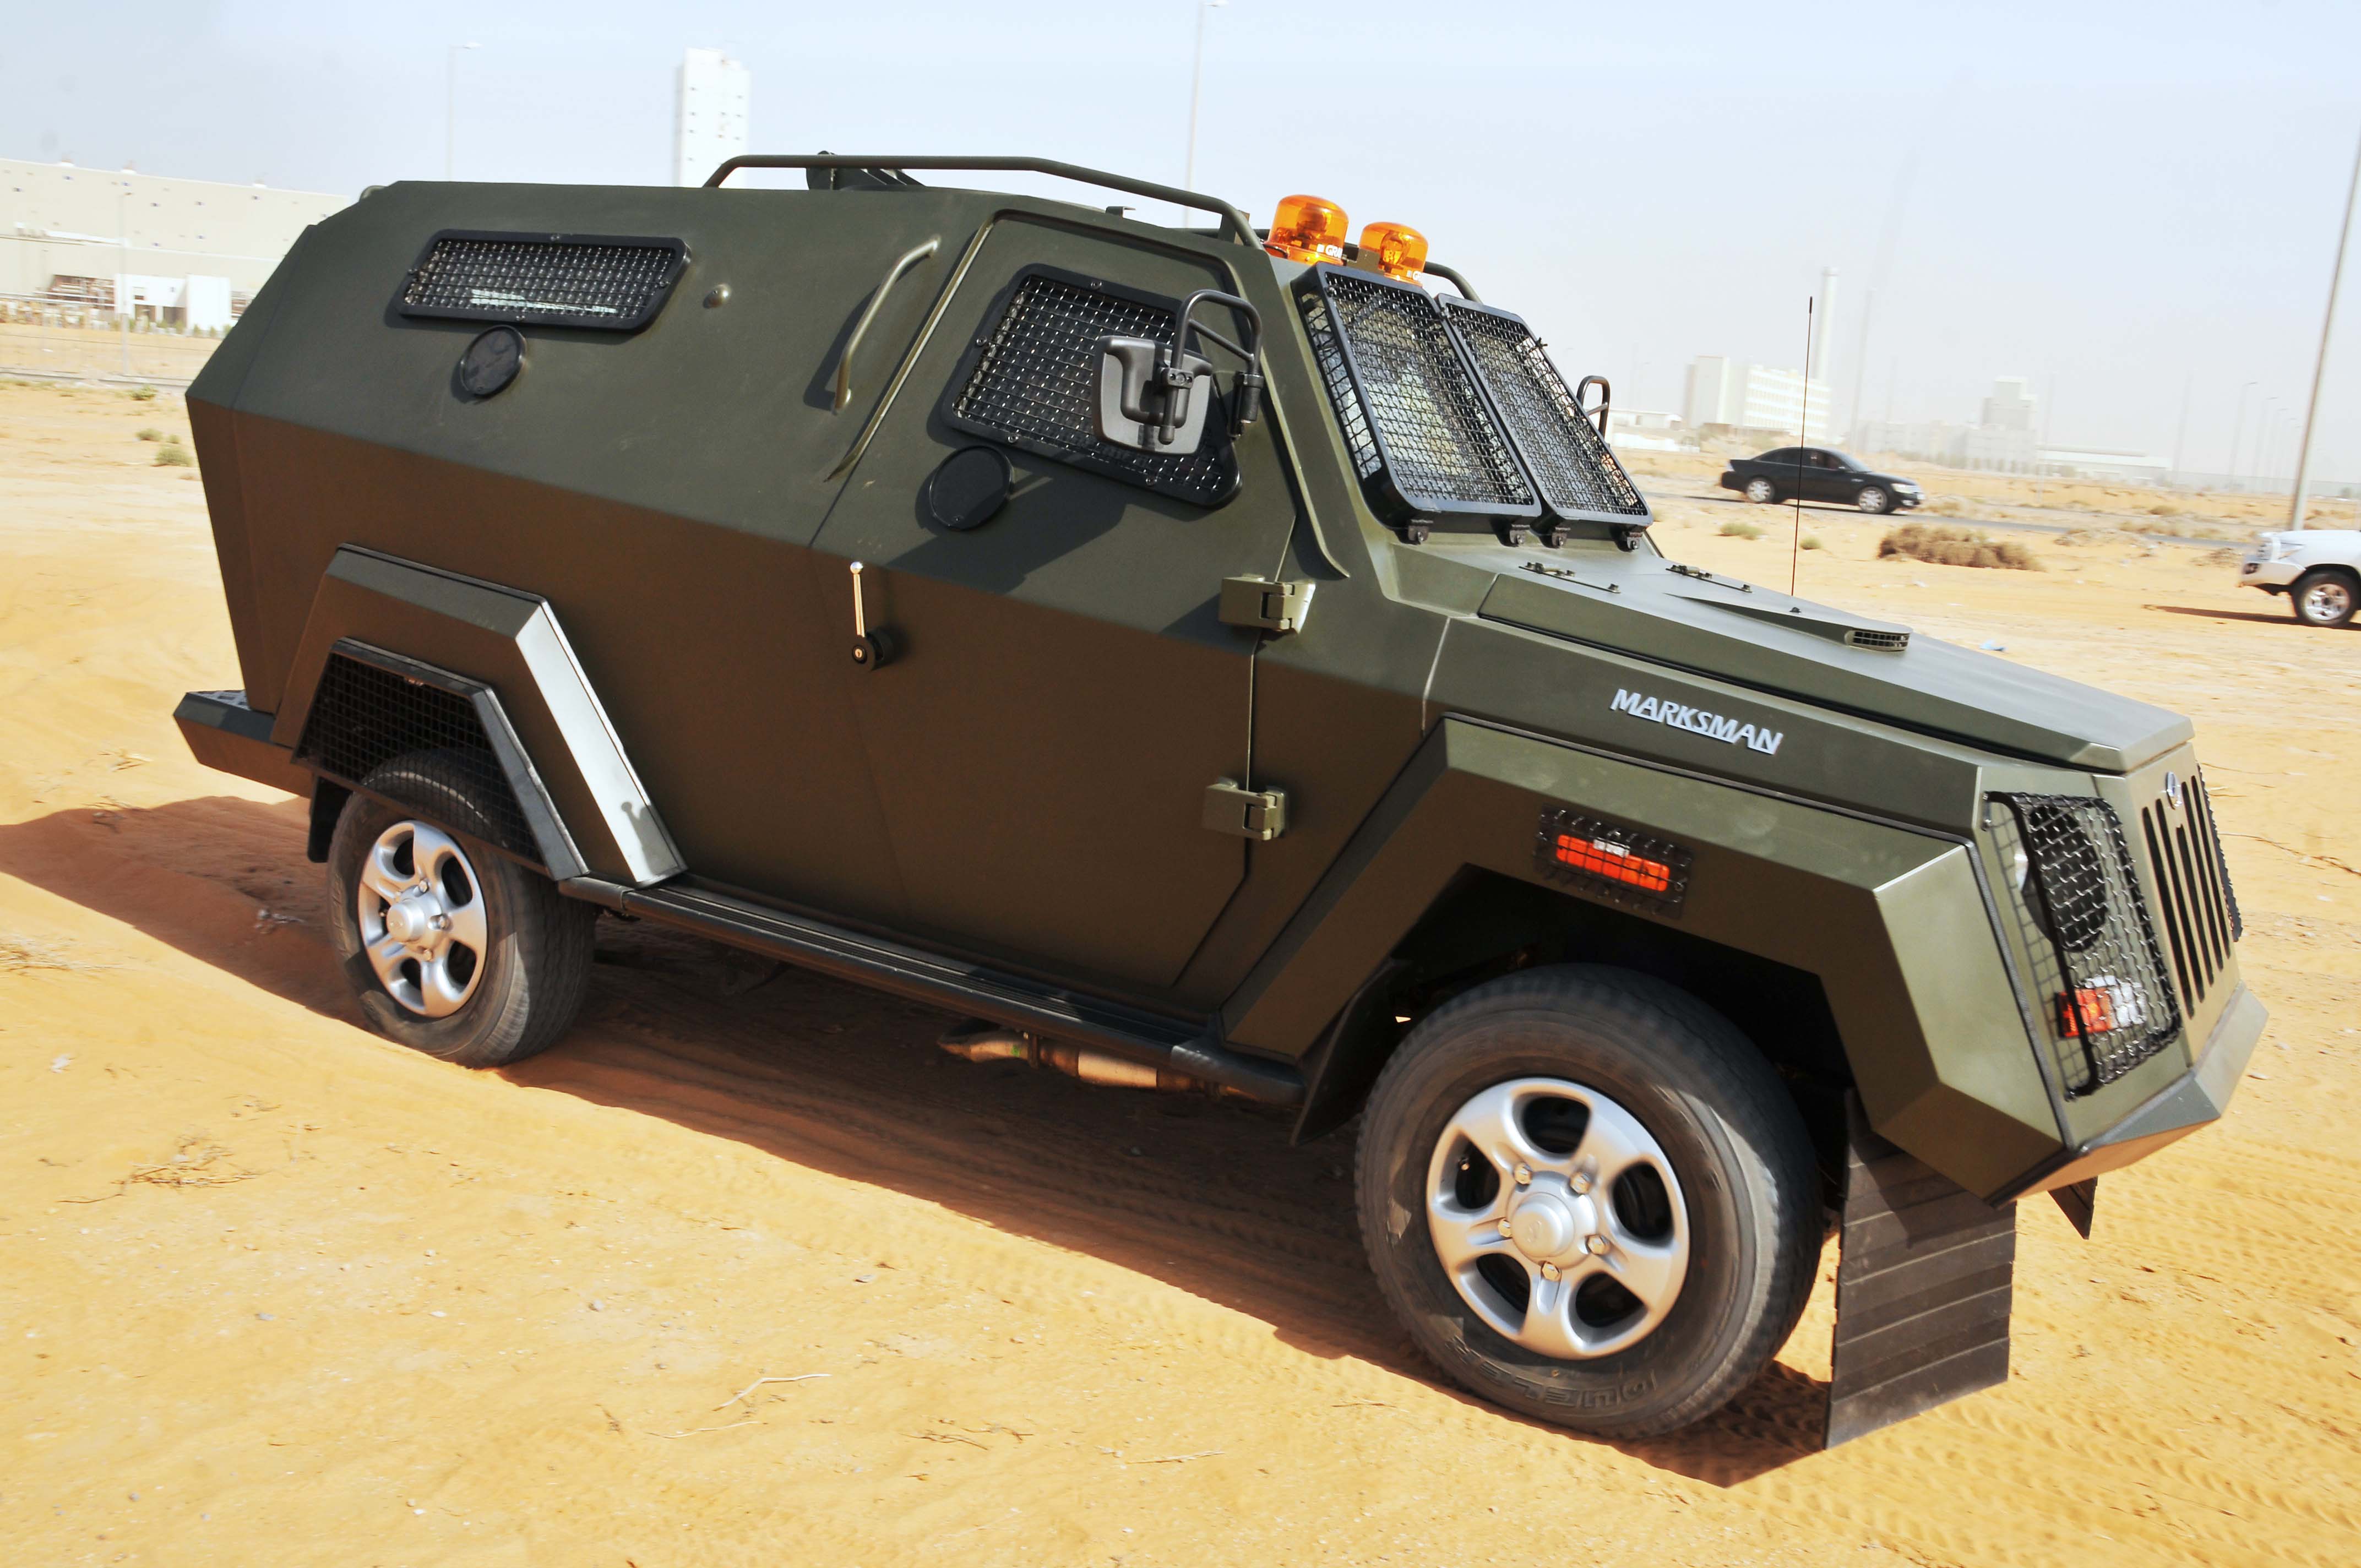        The Mahindra Marksman APC Light Armoured Personnel Carrier